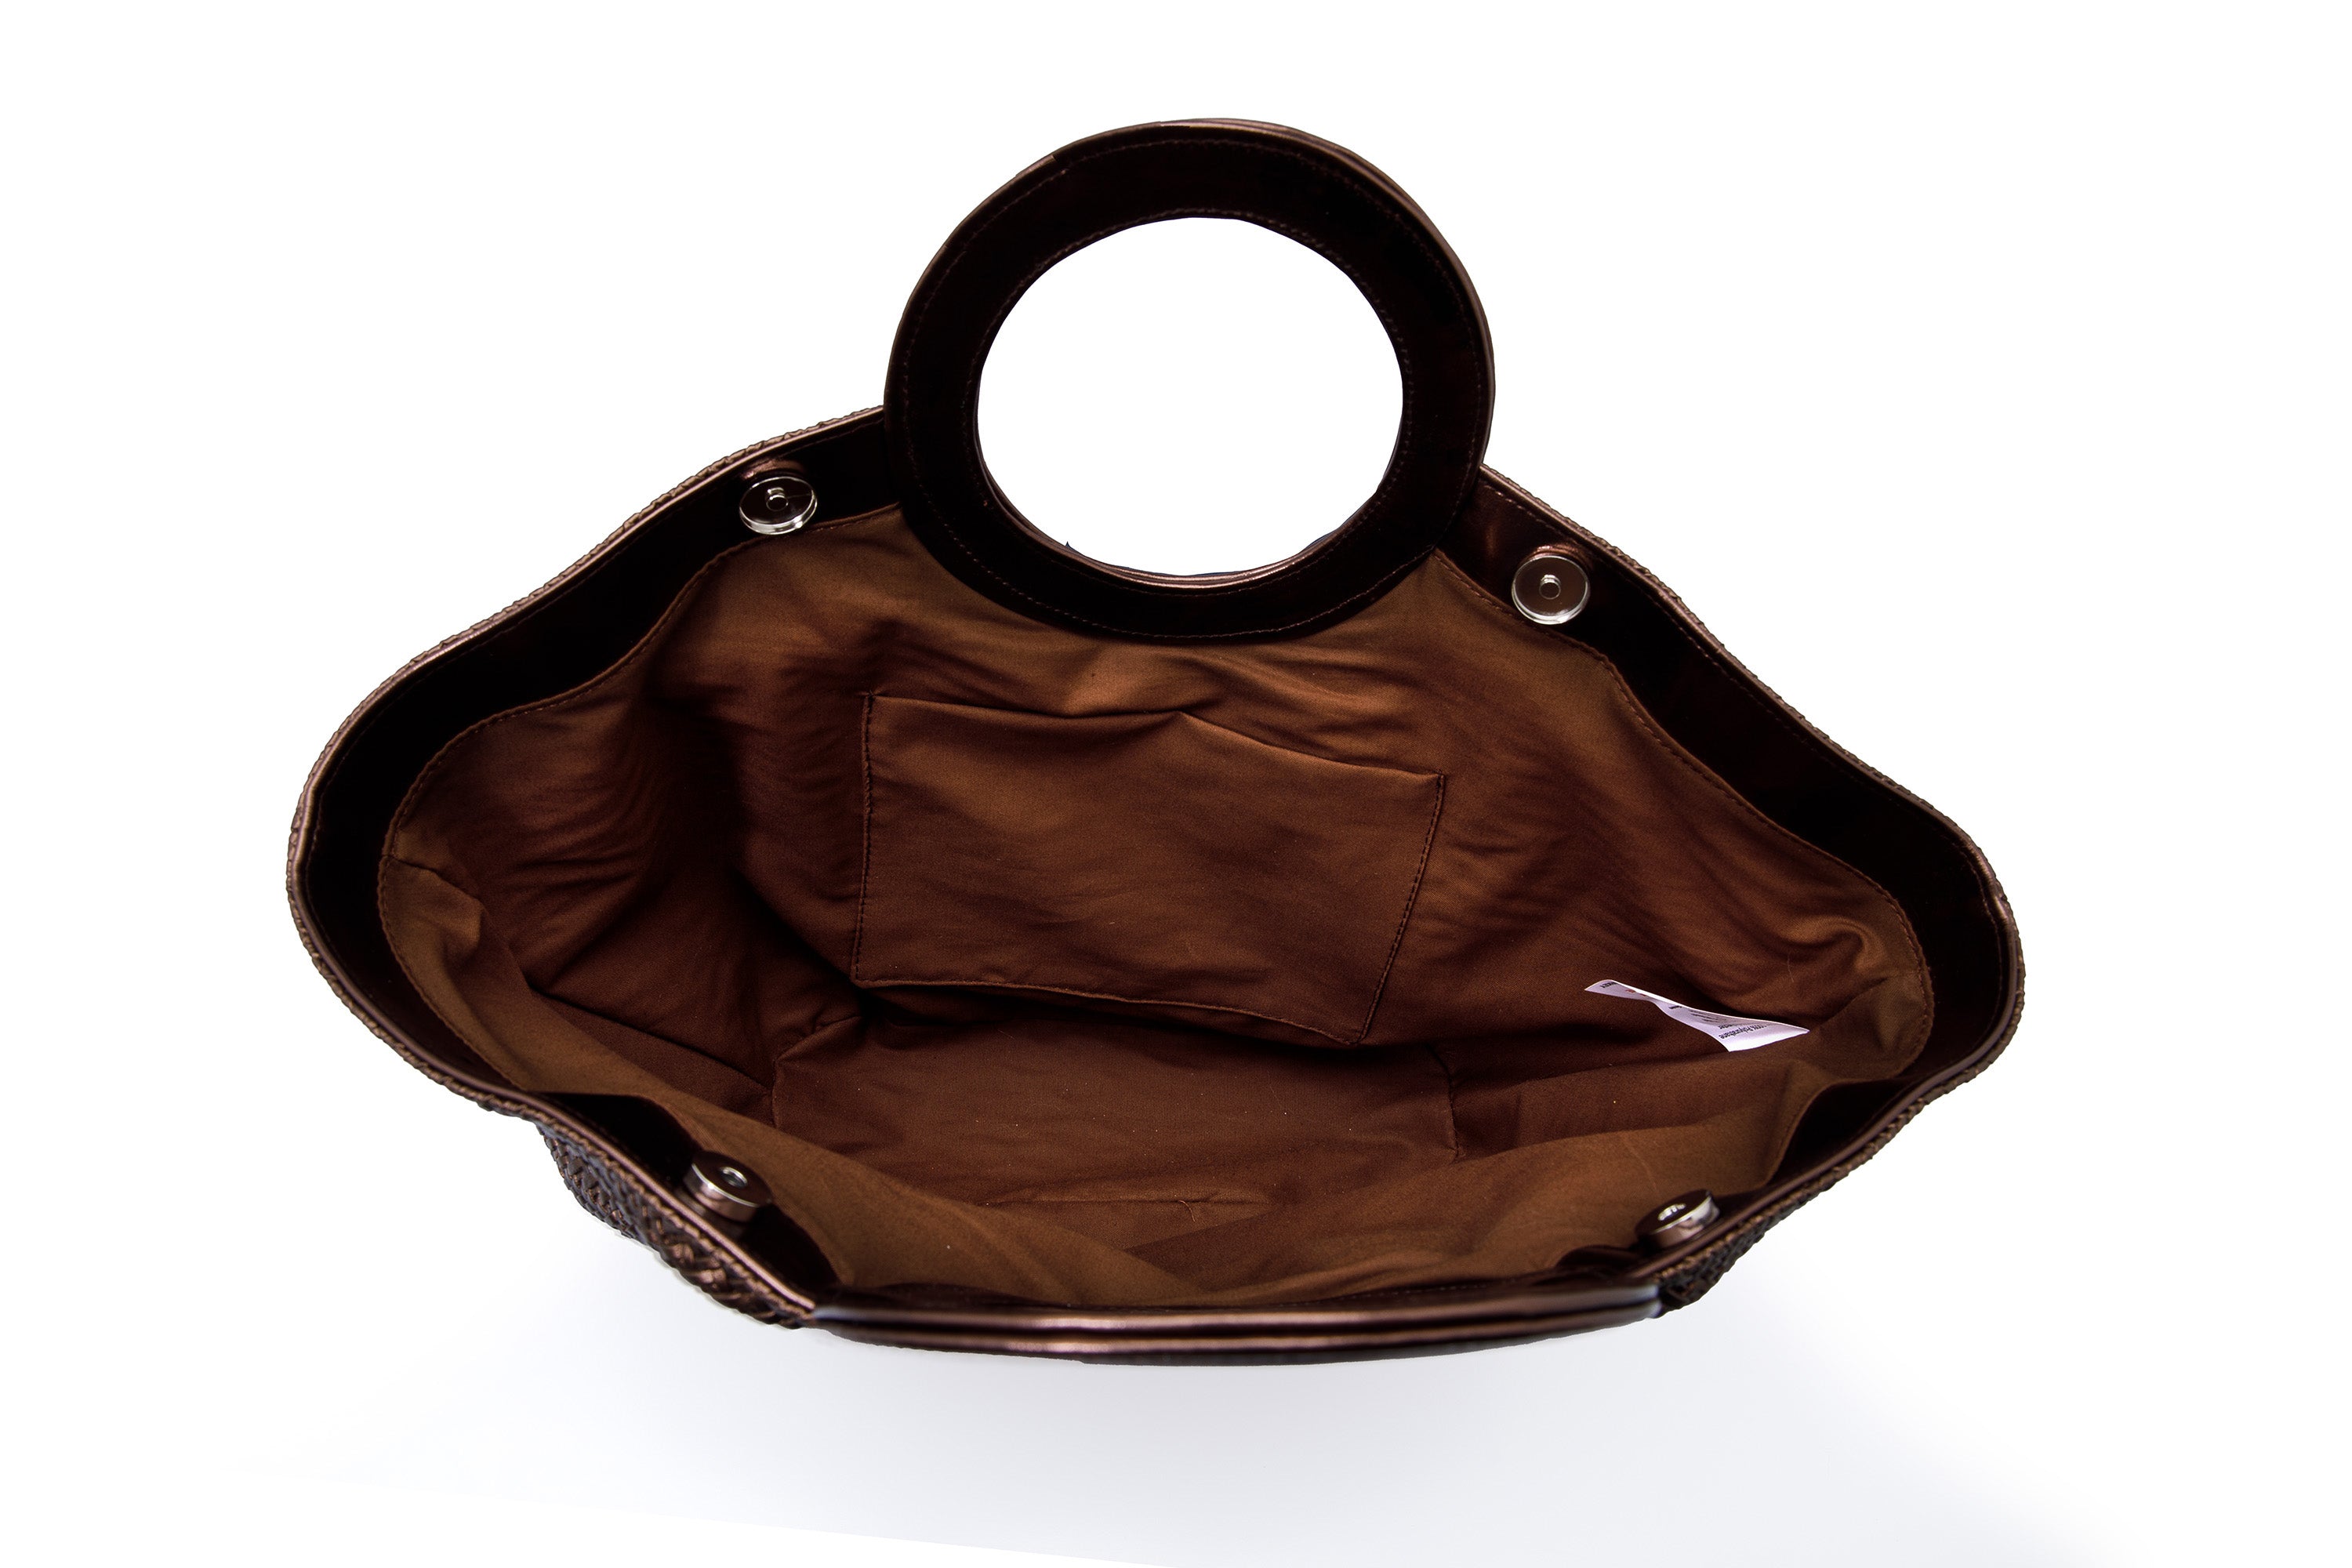 Top Handle Shimmer Fan Tote Bag - Shimmery Brown